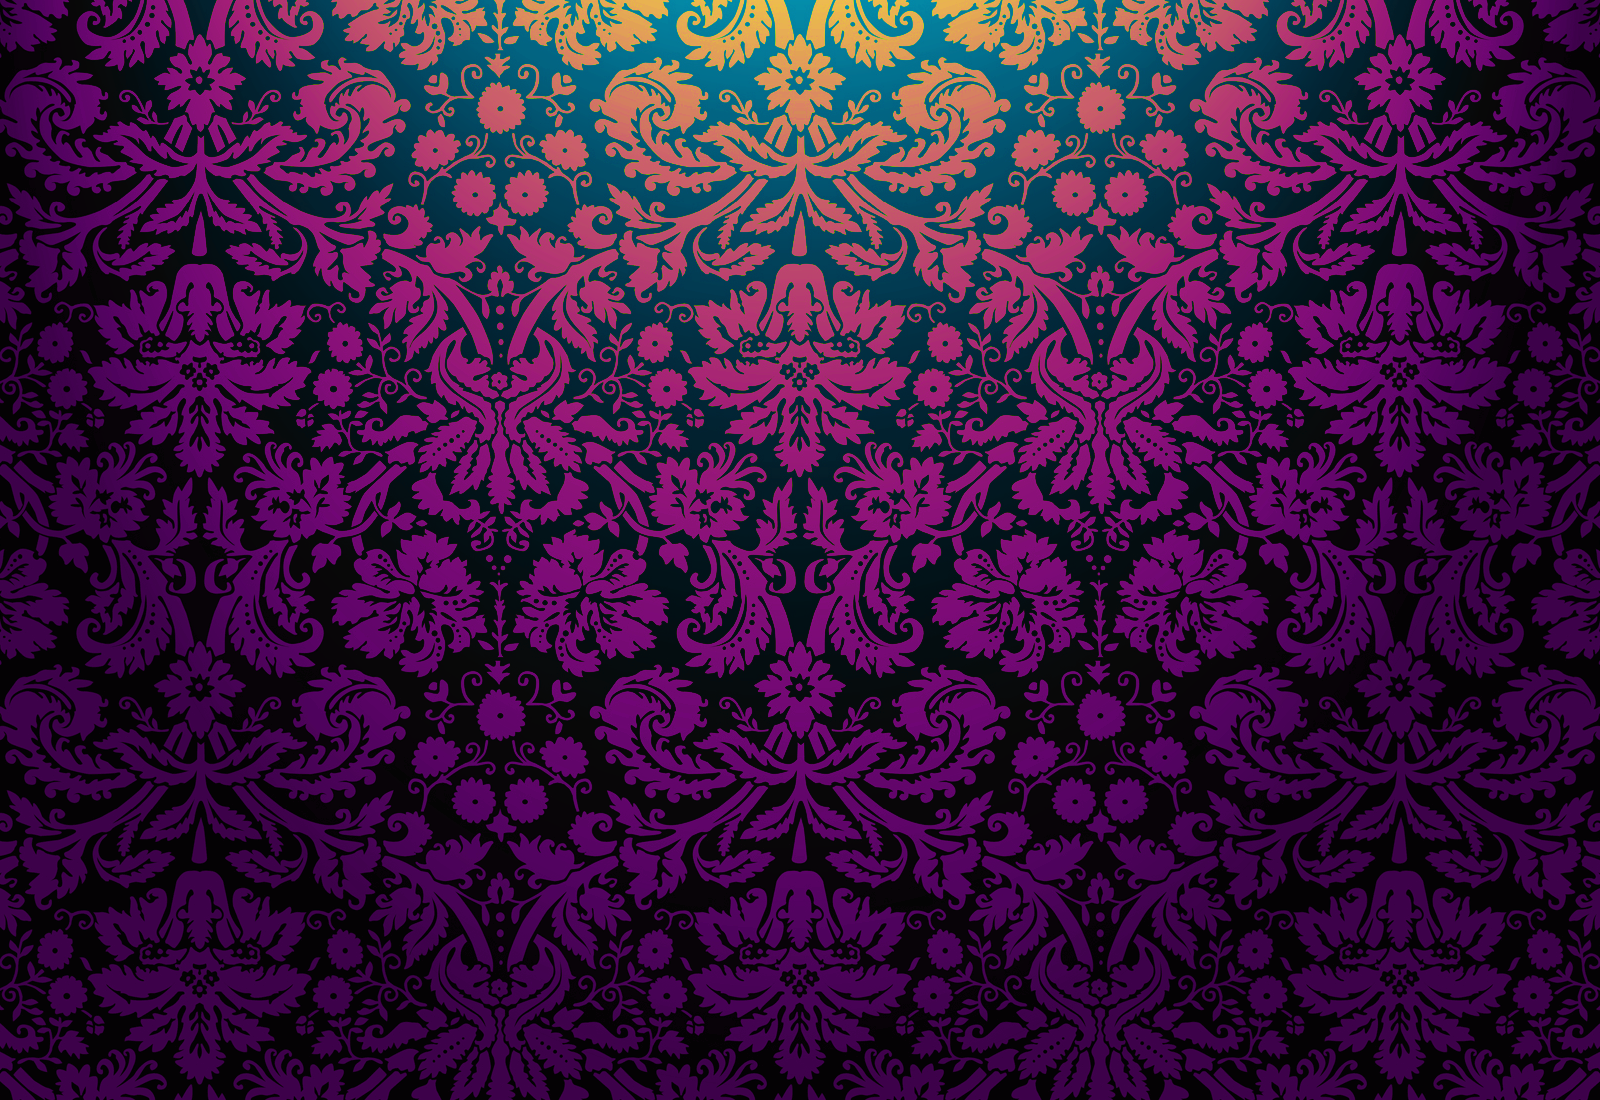 free gold damask background clipart